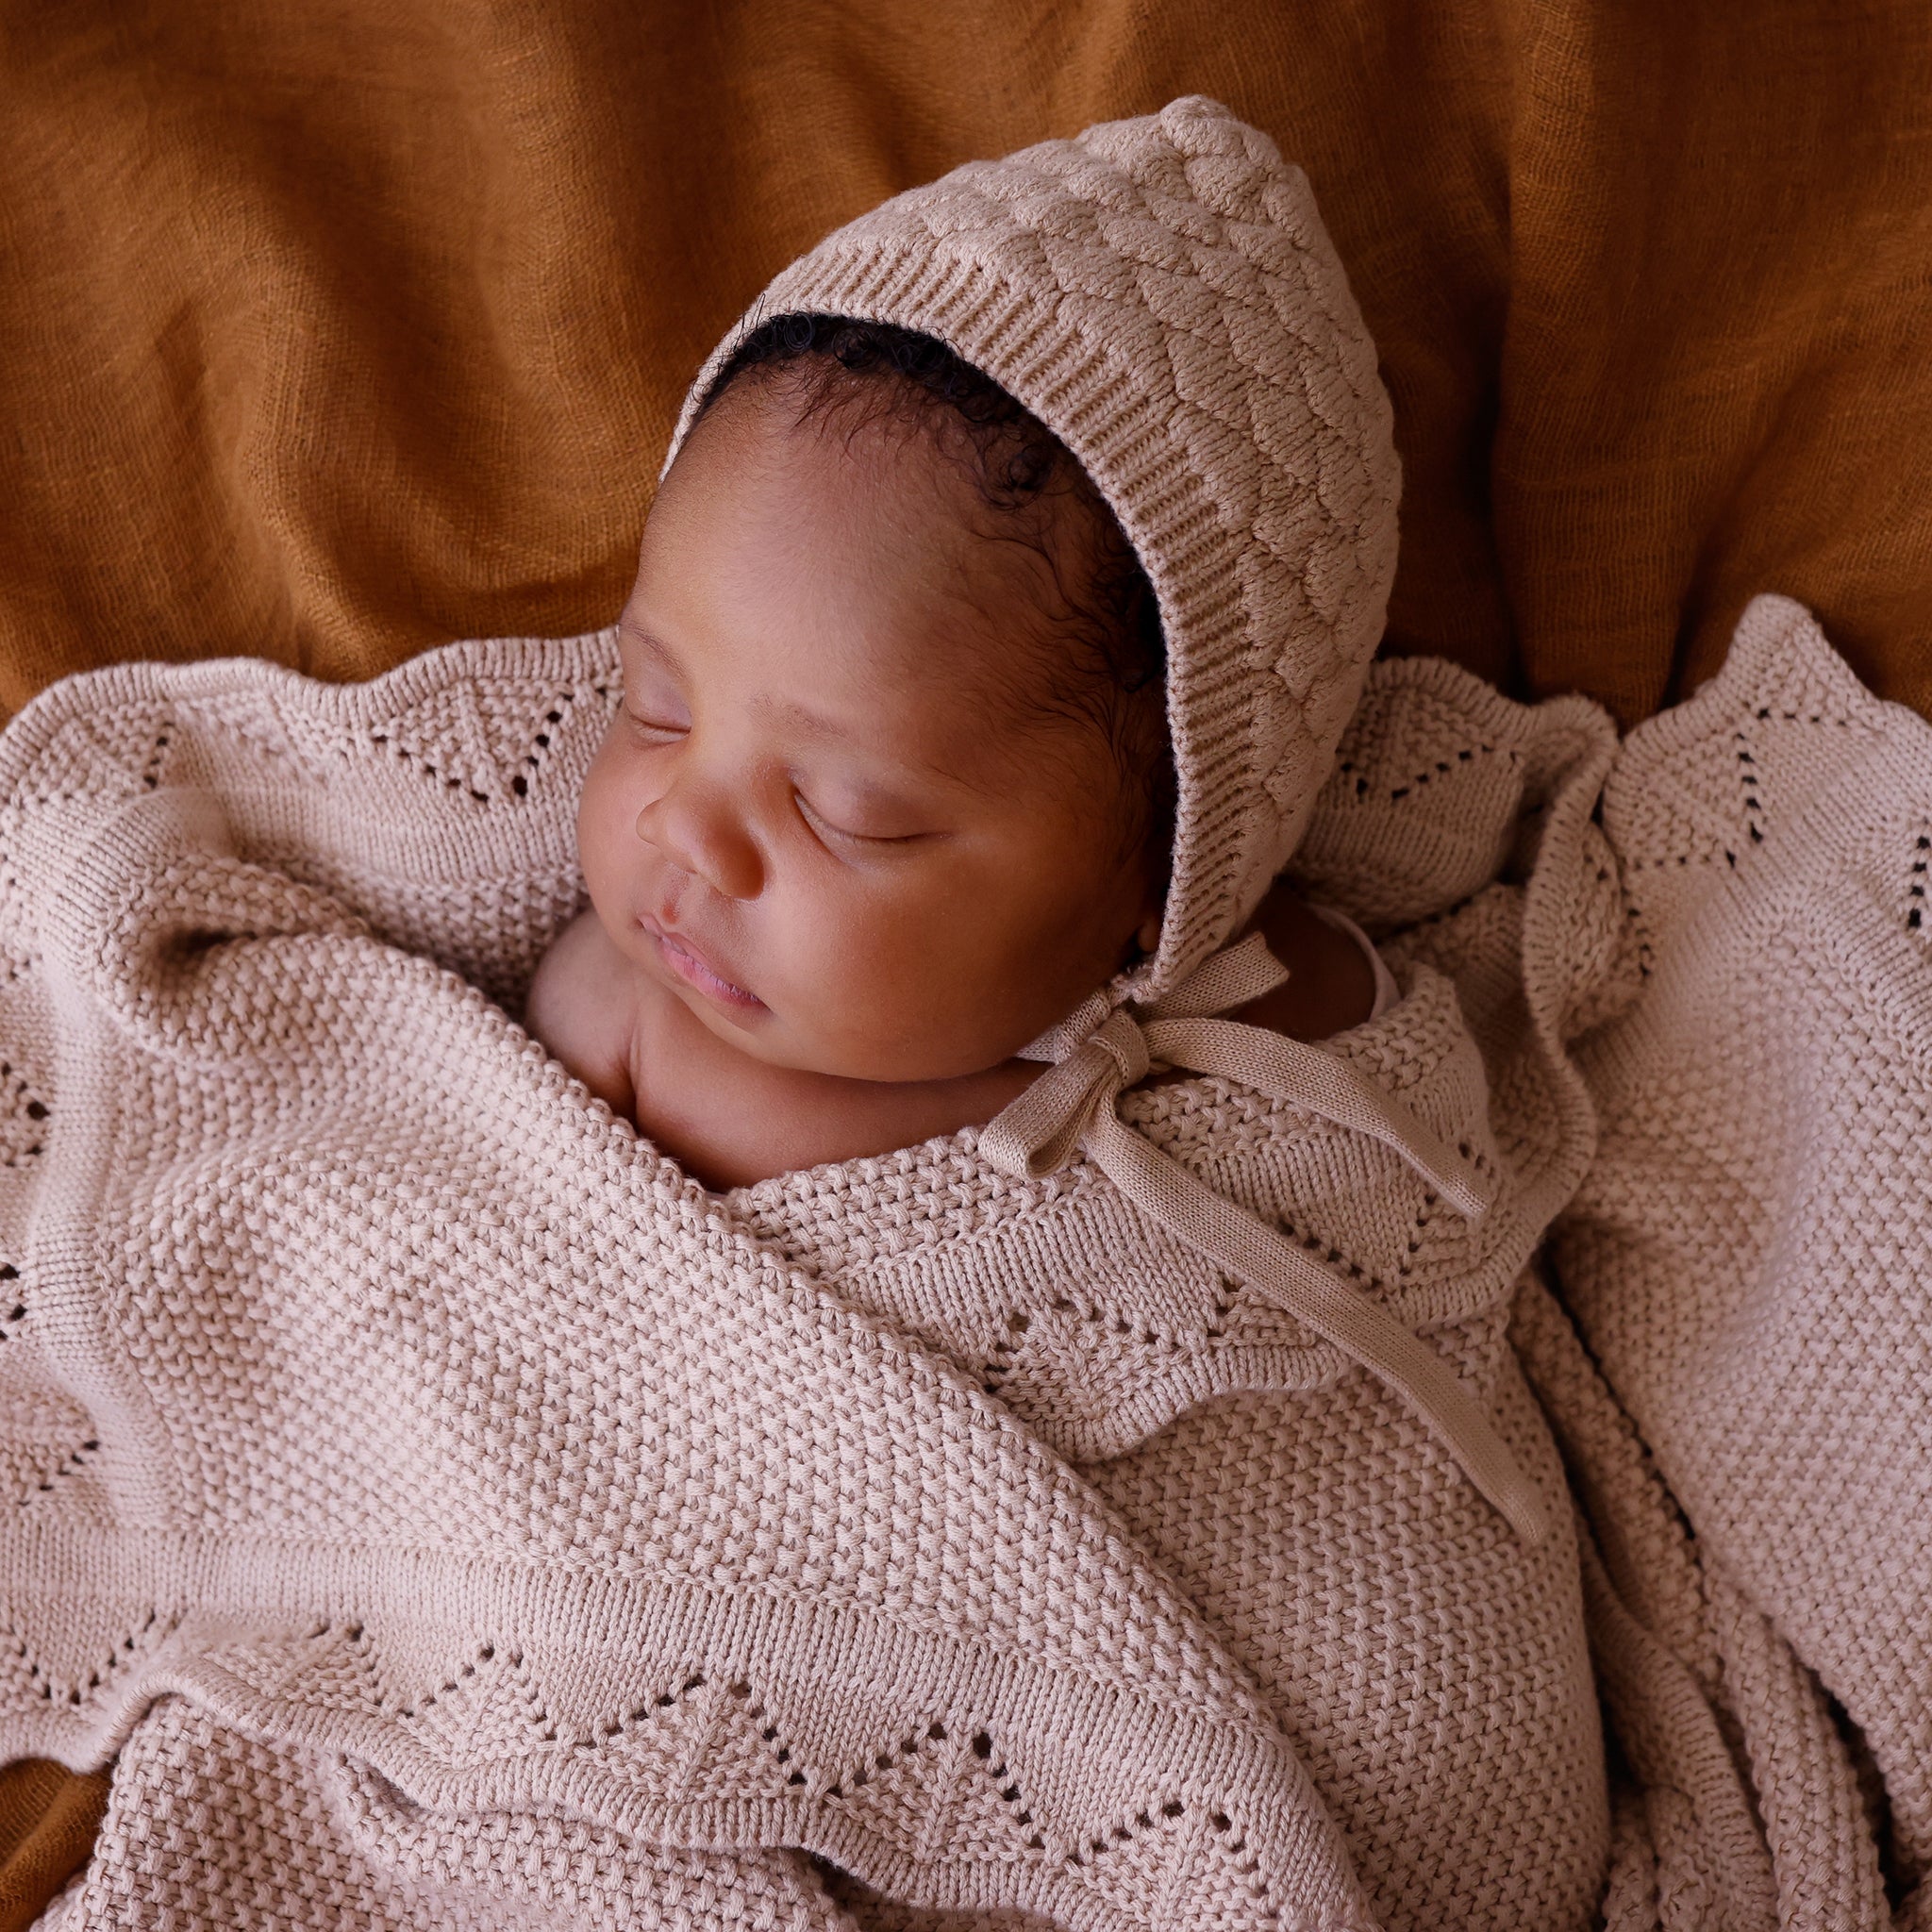 baby bonnet heirloom cotton knit tan colour matches the tan heirloom blanket.It is a keepsake